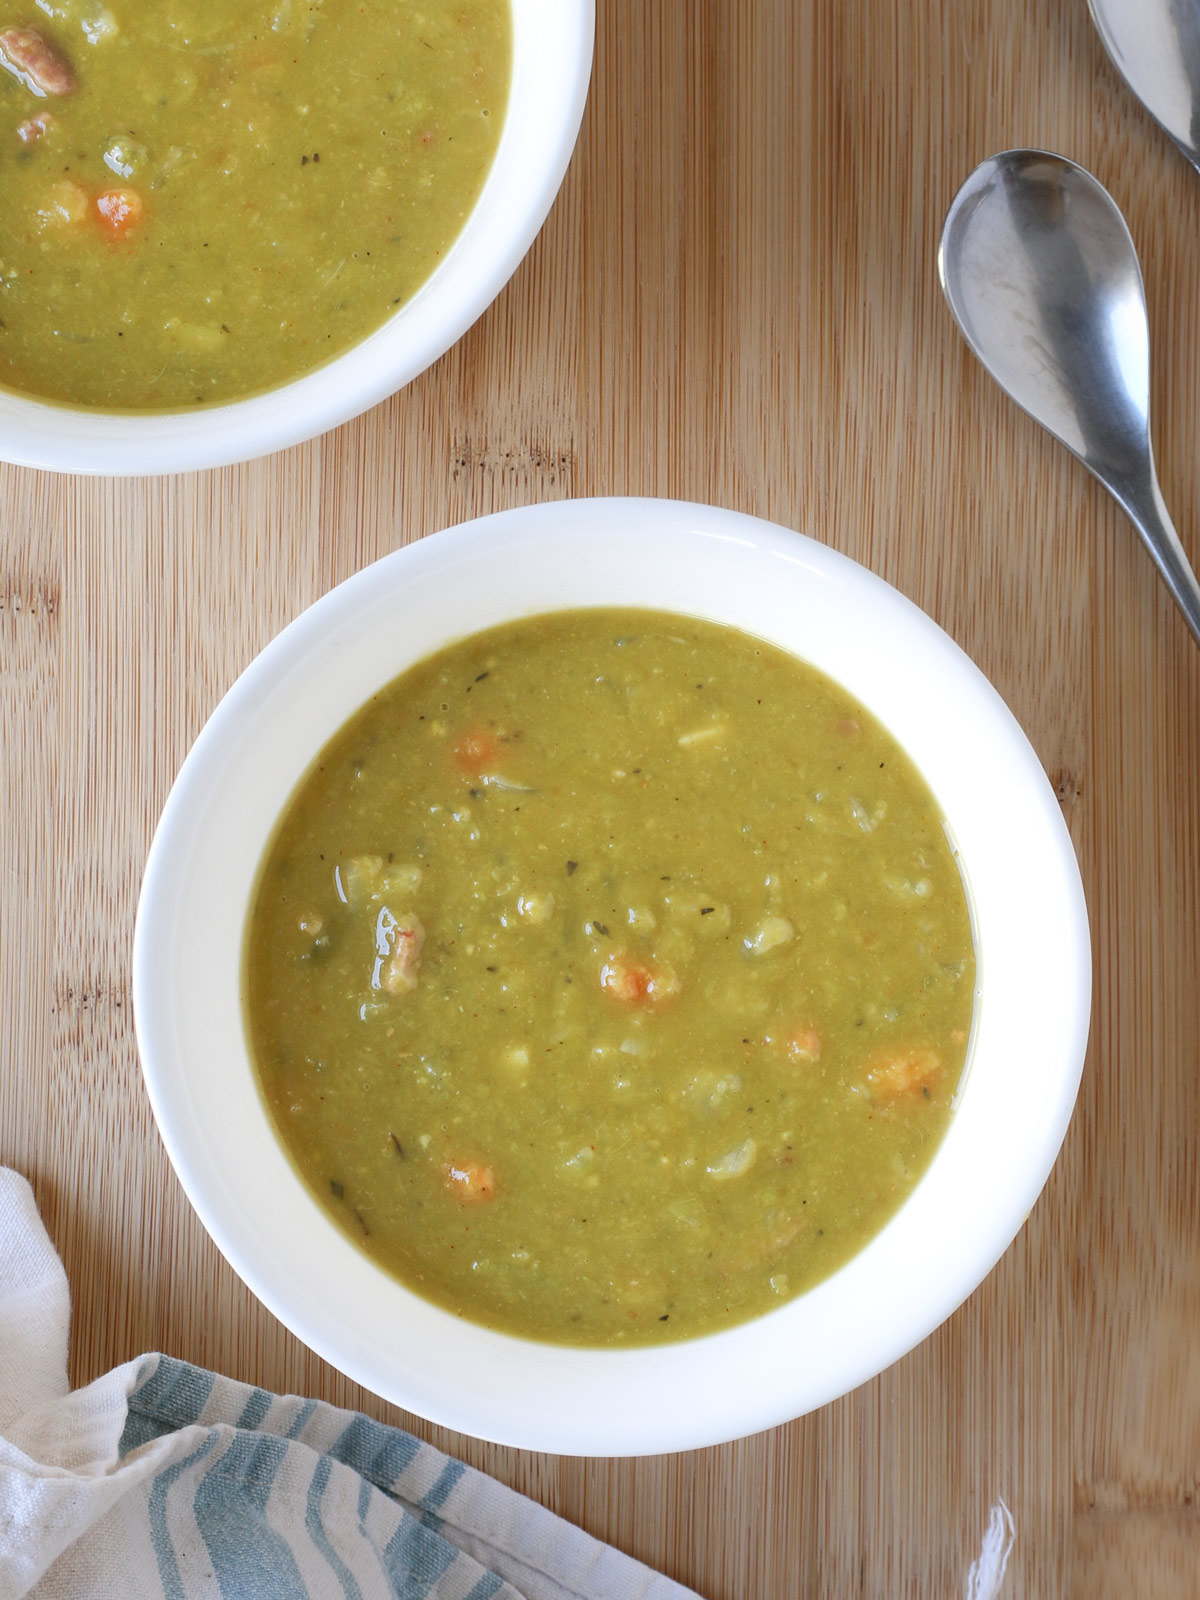 two bowls of split pea soup on a wood table.